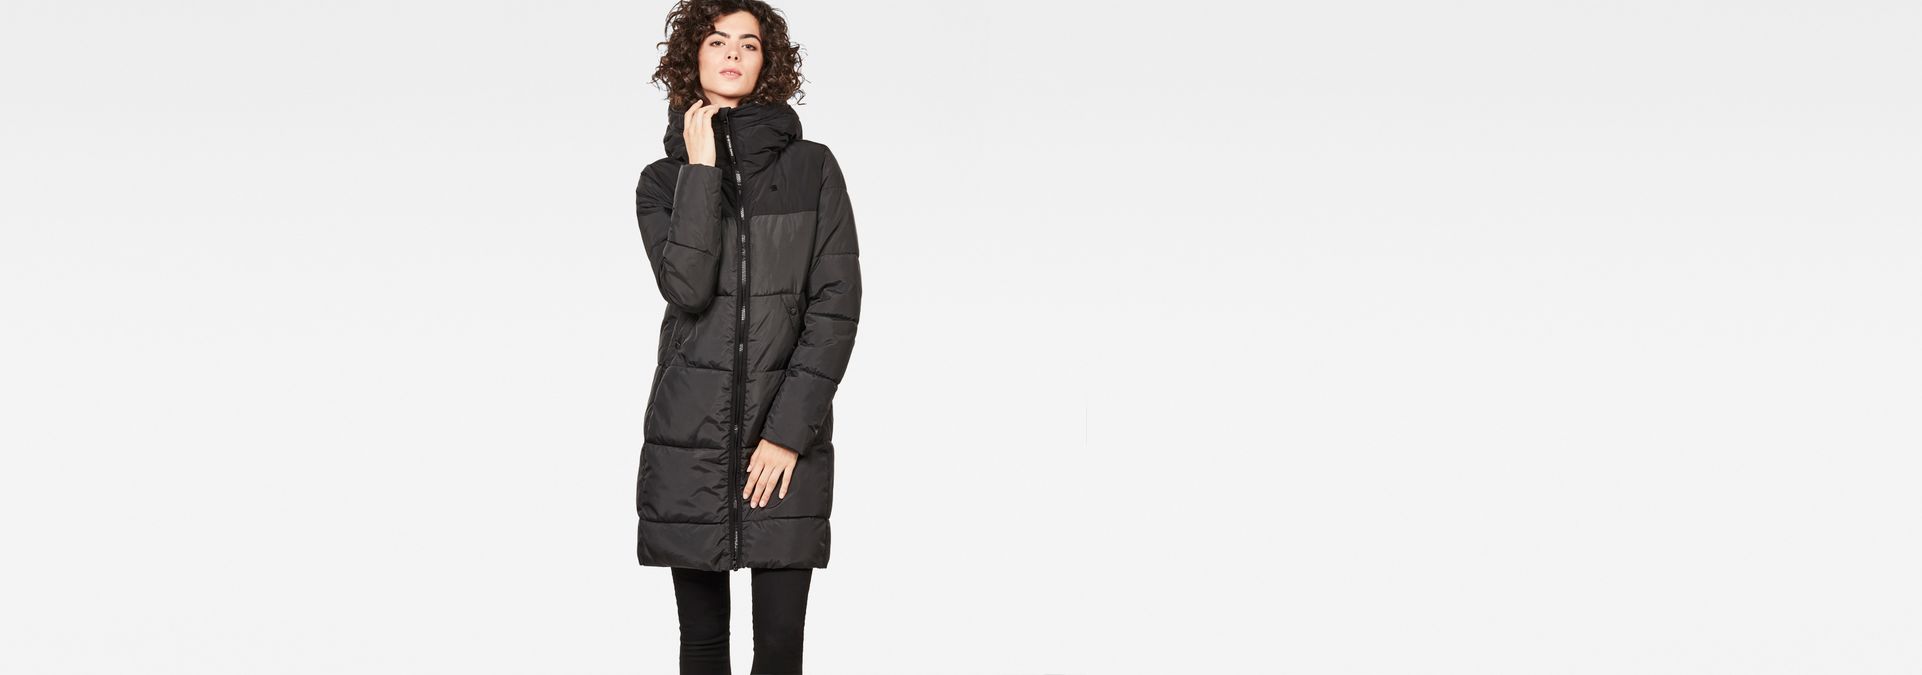 whistler hooded quilted slim long coat